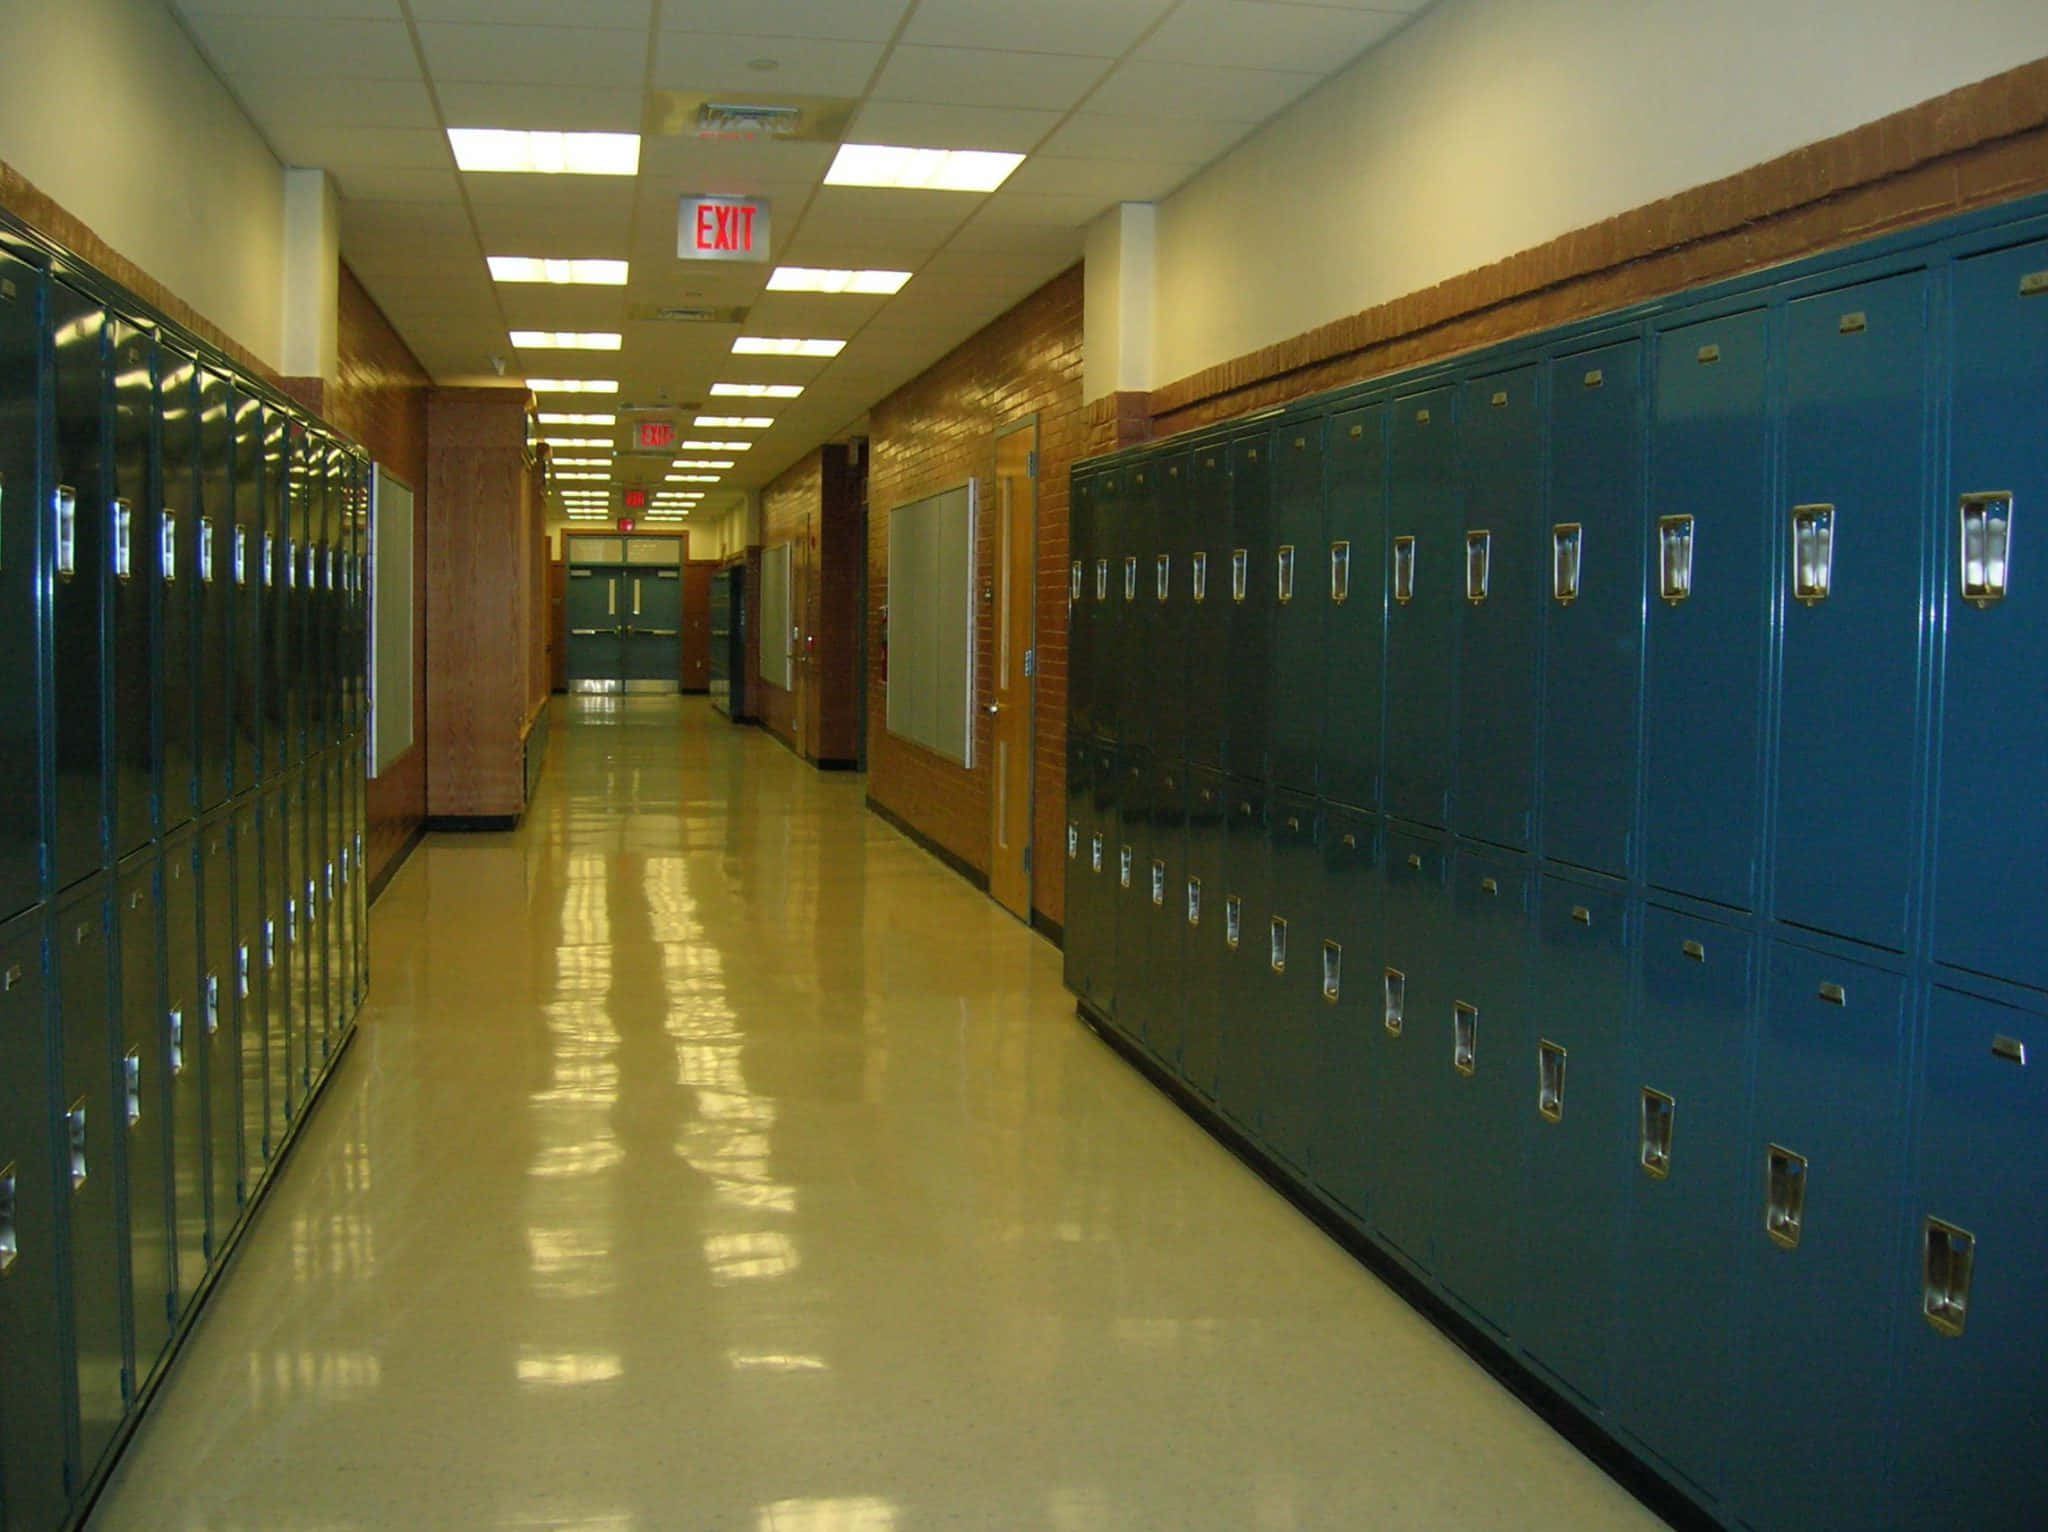 A Long Hallway With Lockers